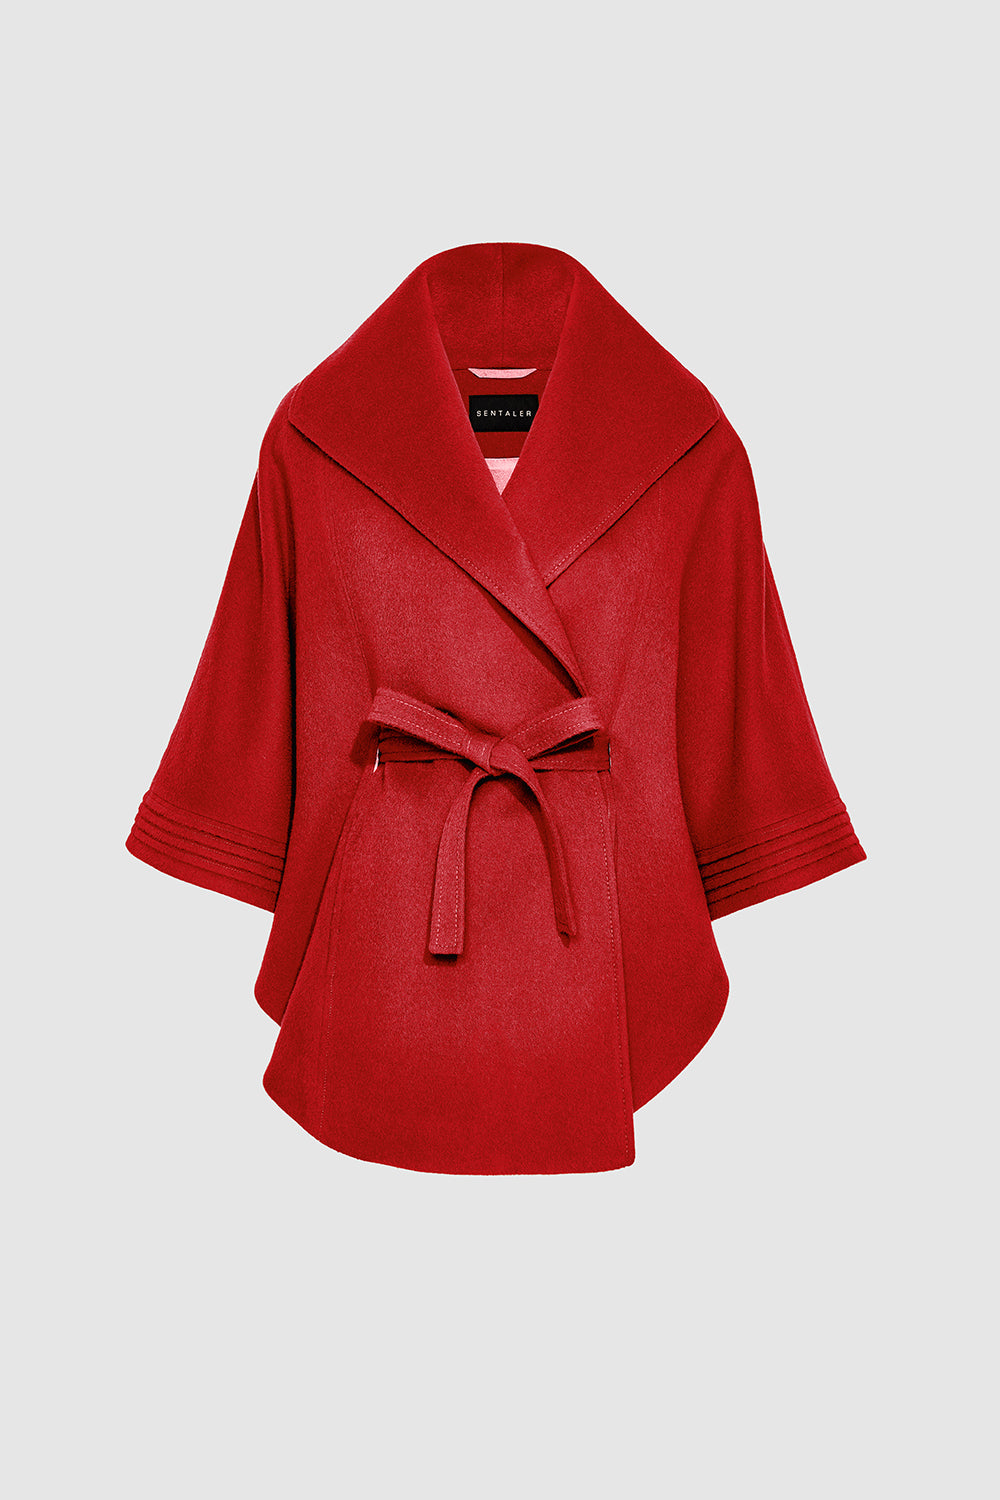 Scarlet Red Cape with Shawl Collar and Belt